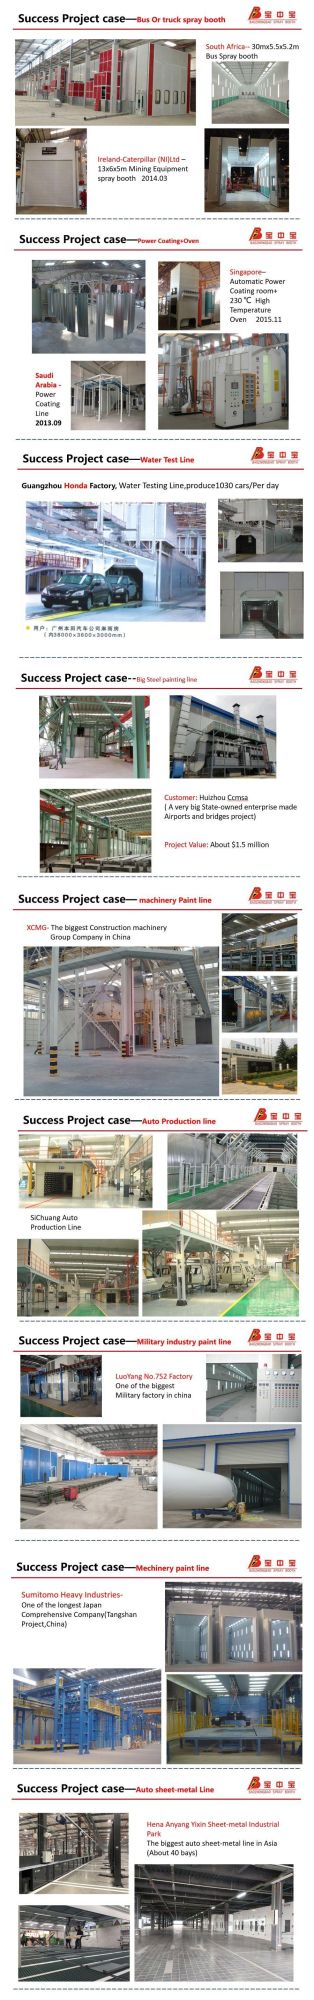 Airplane Spray Booth From Bzb Finishing Solutions Spray Systems Equipments